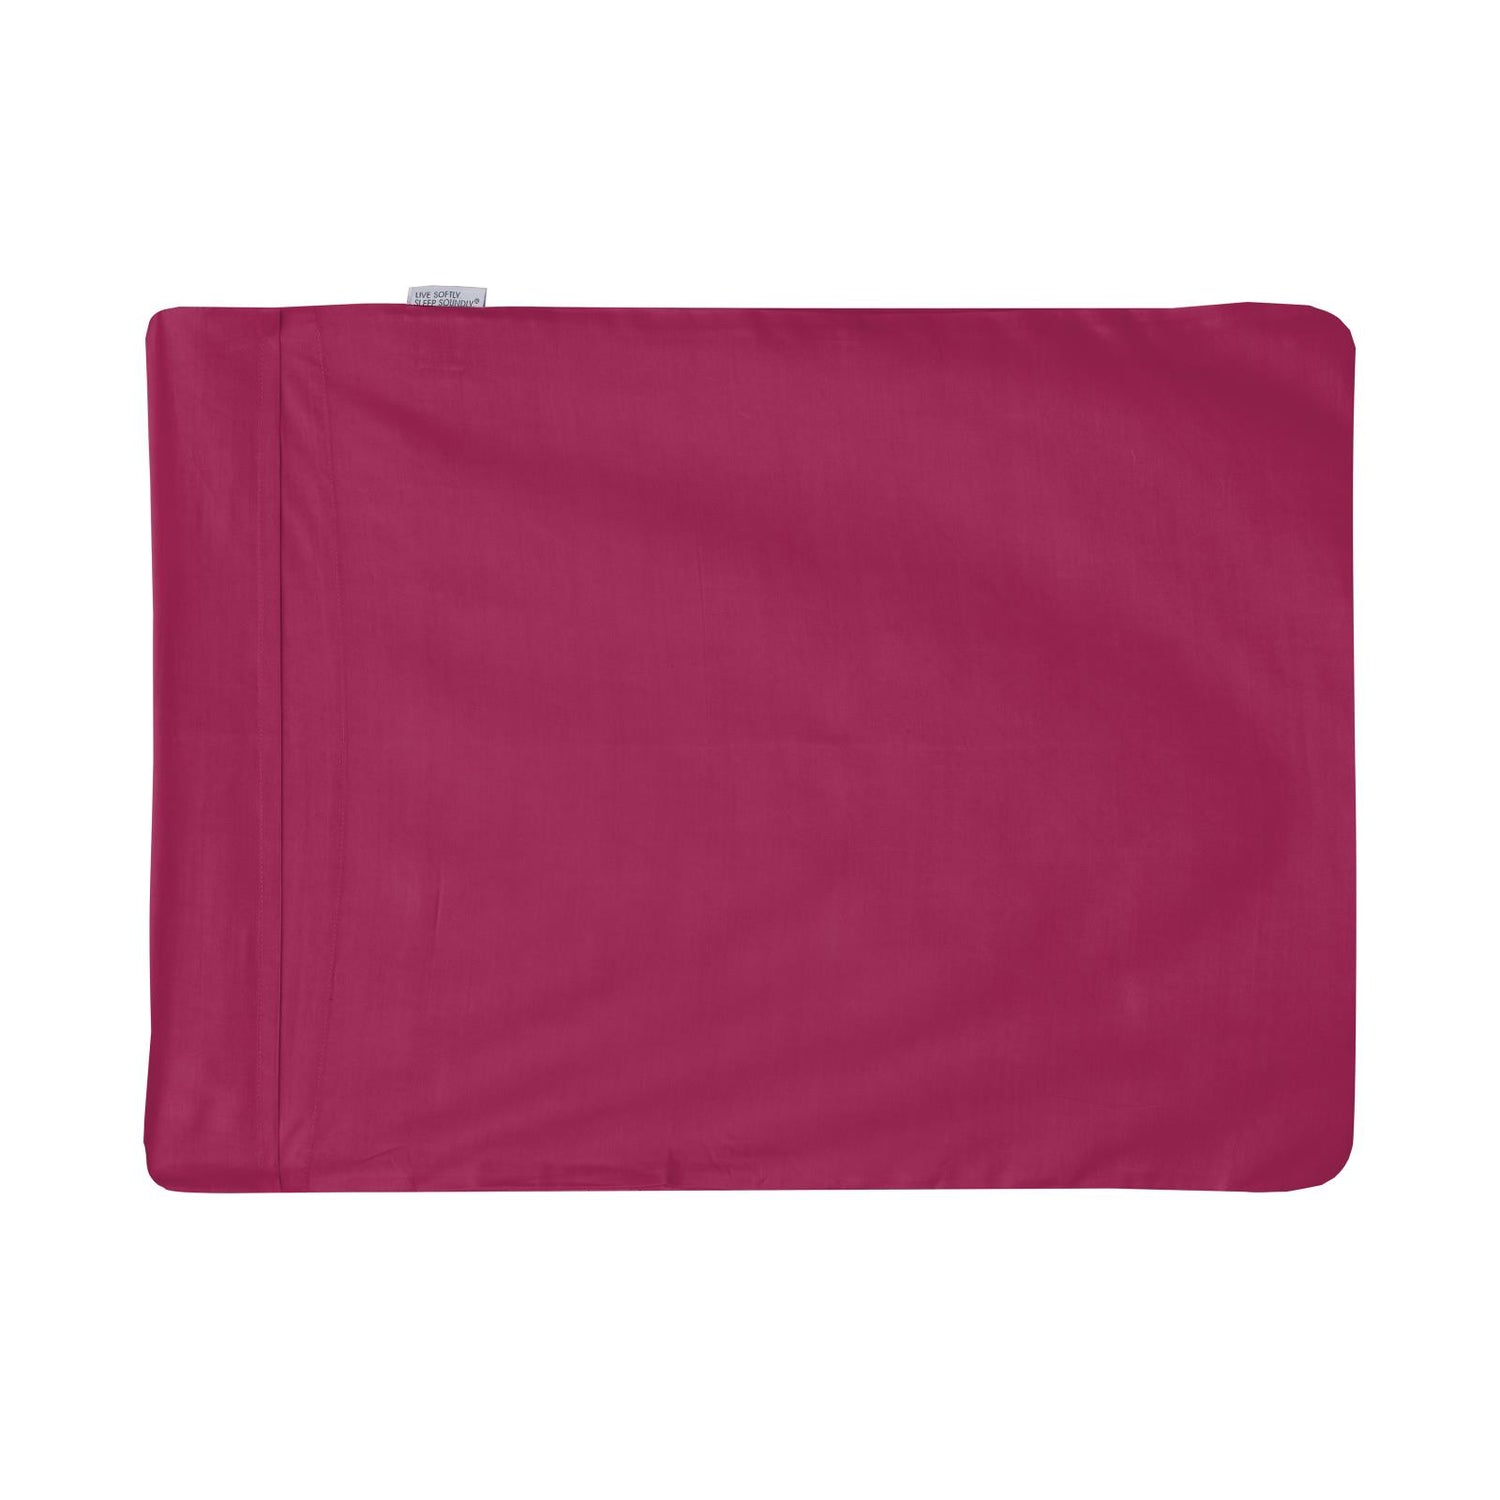 Woven Pillowcase in Berry